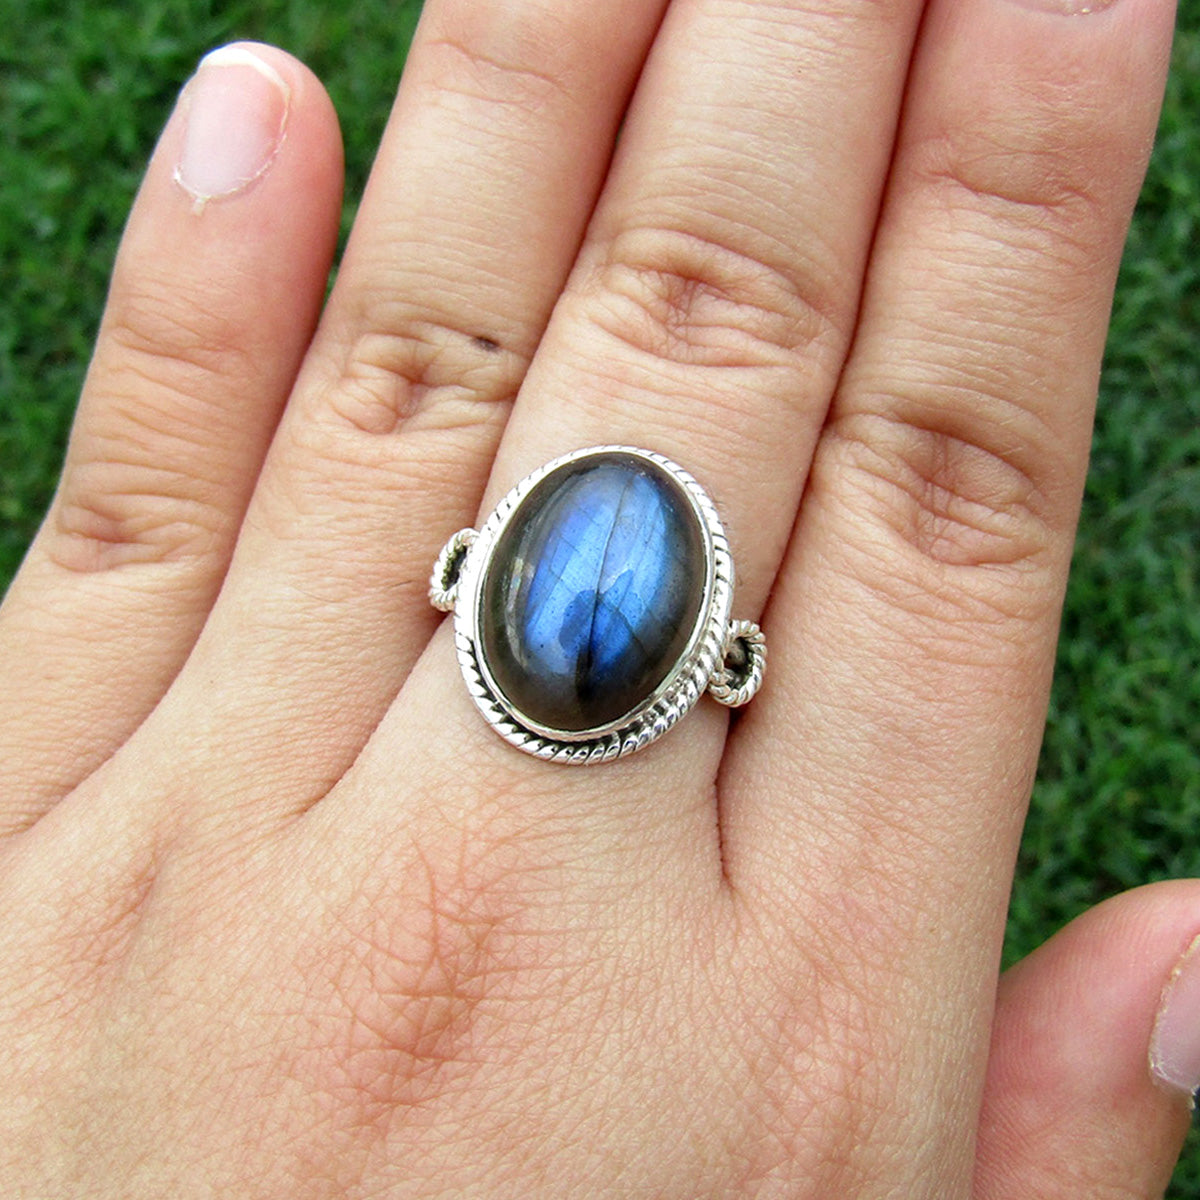 Labradorite Oval Braided Sterling Silver Ring US 8 SS-046